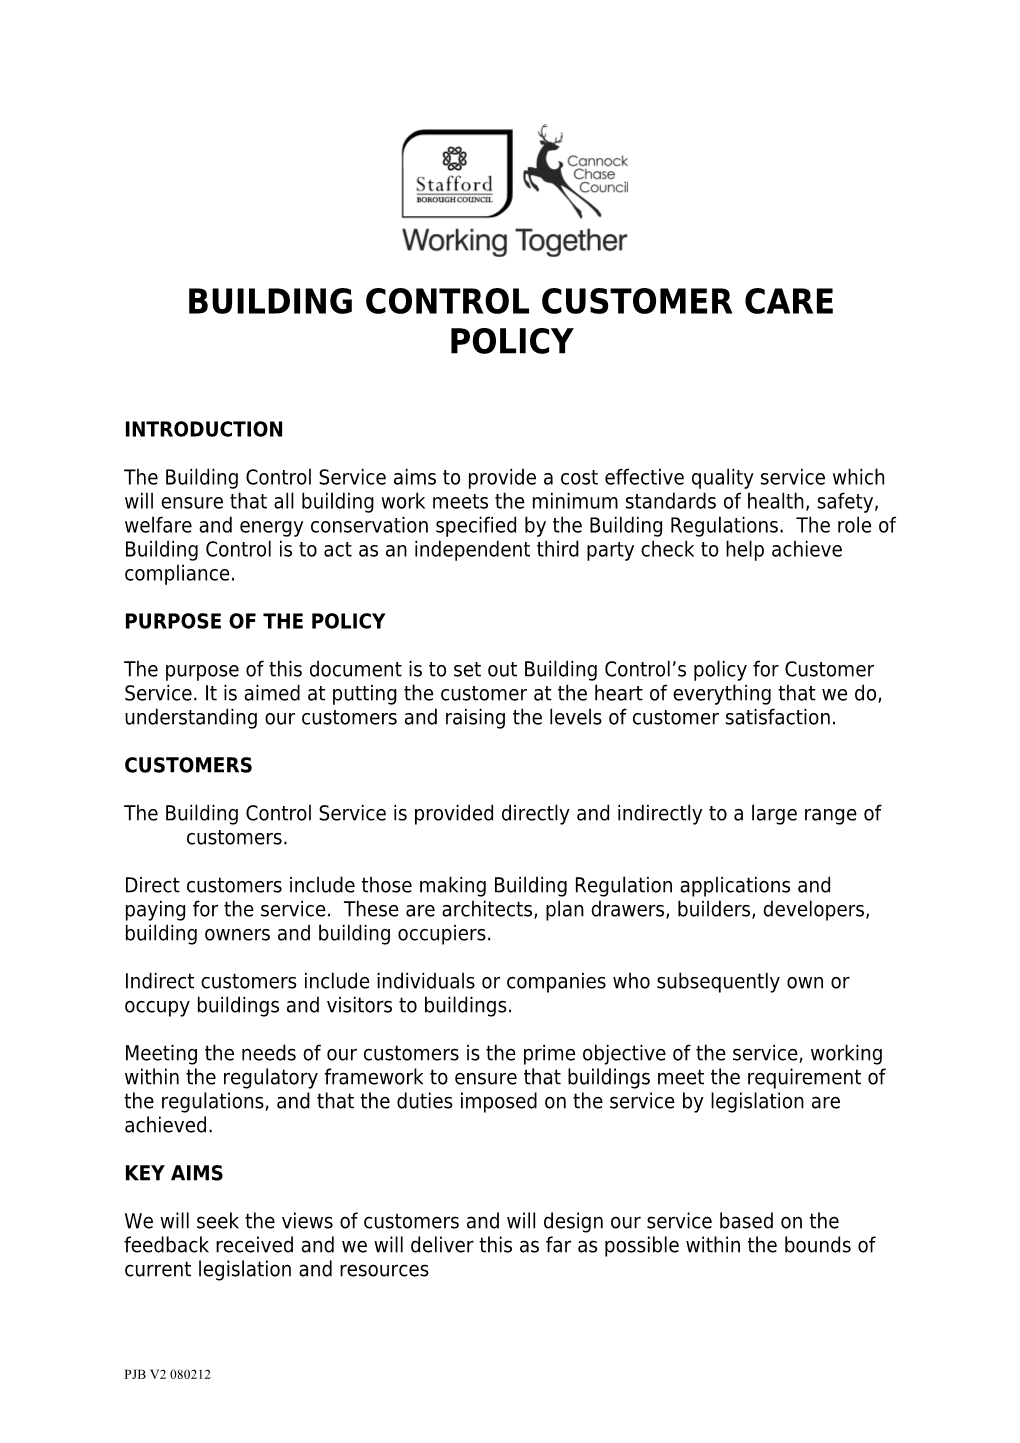 Building Control Customer Care Policy